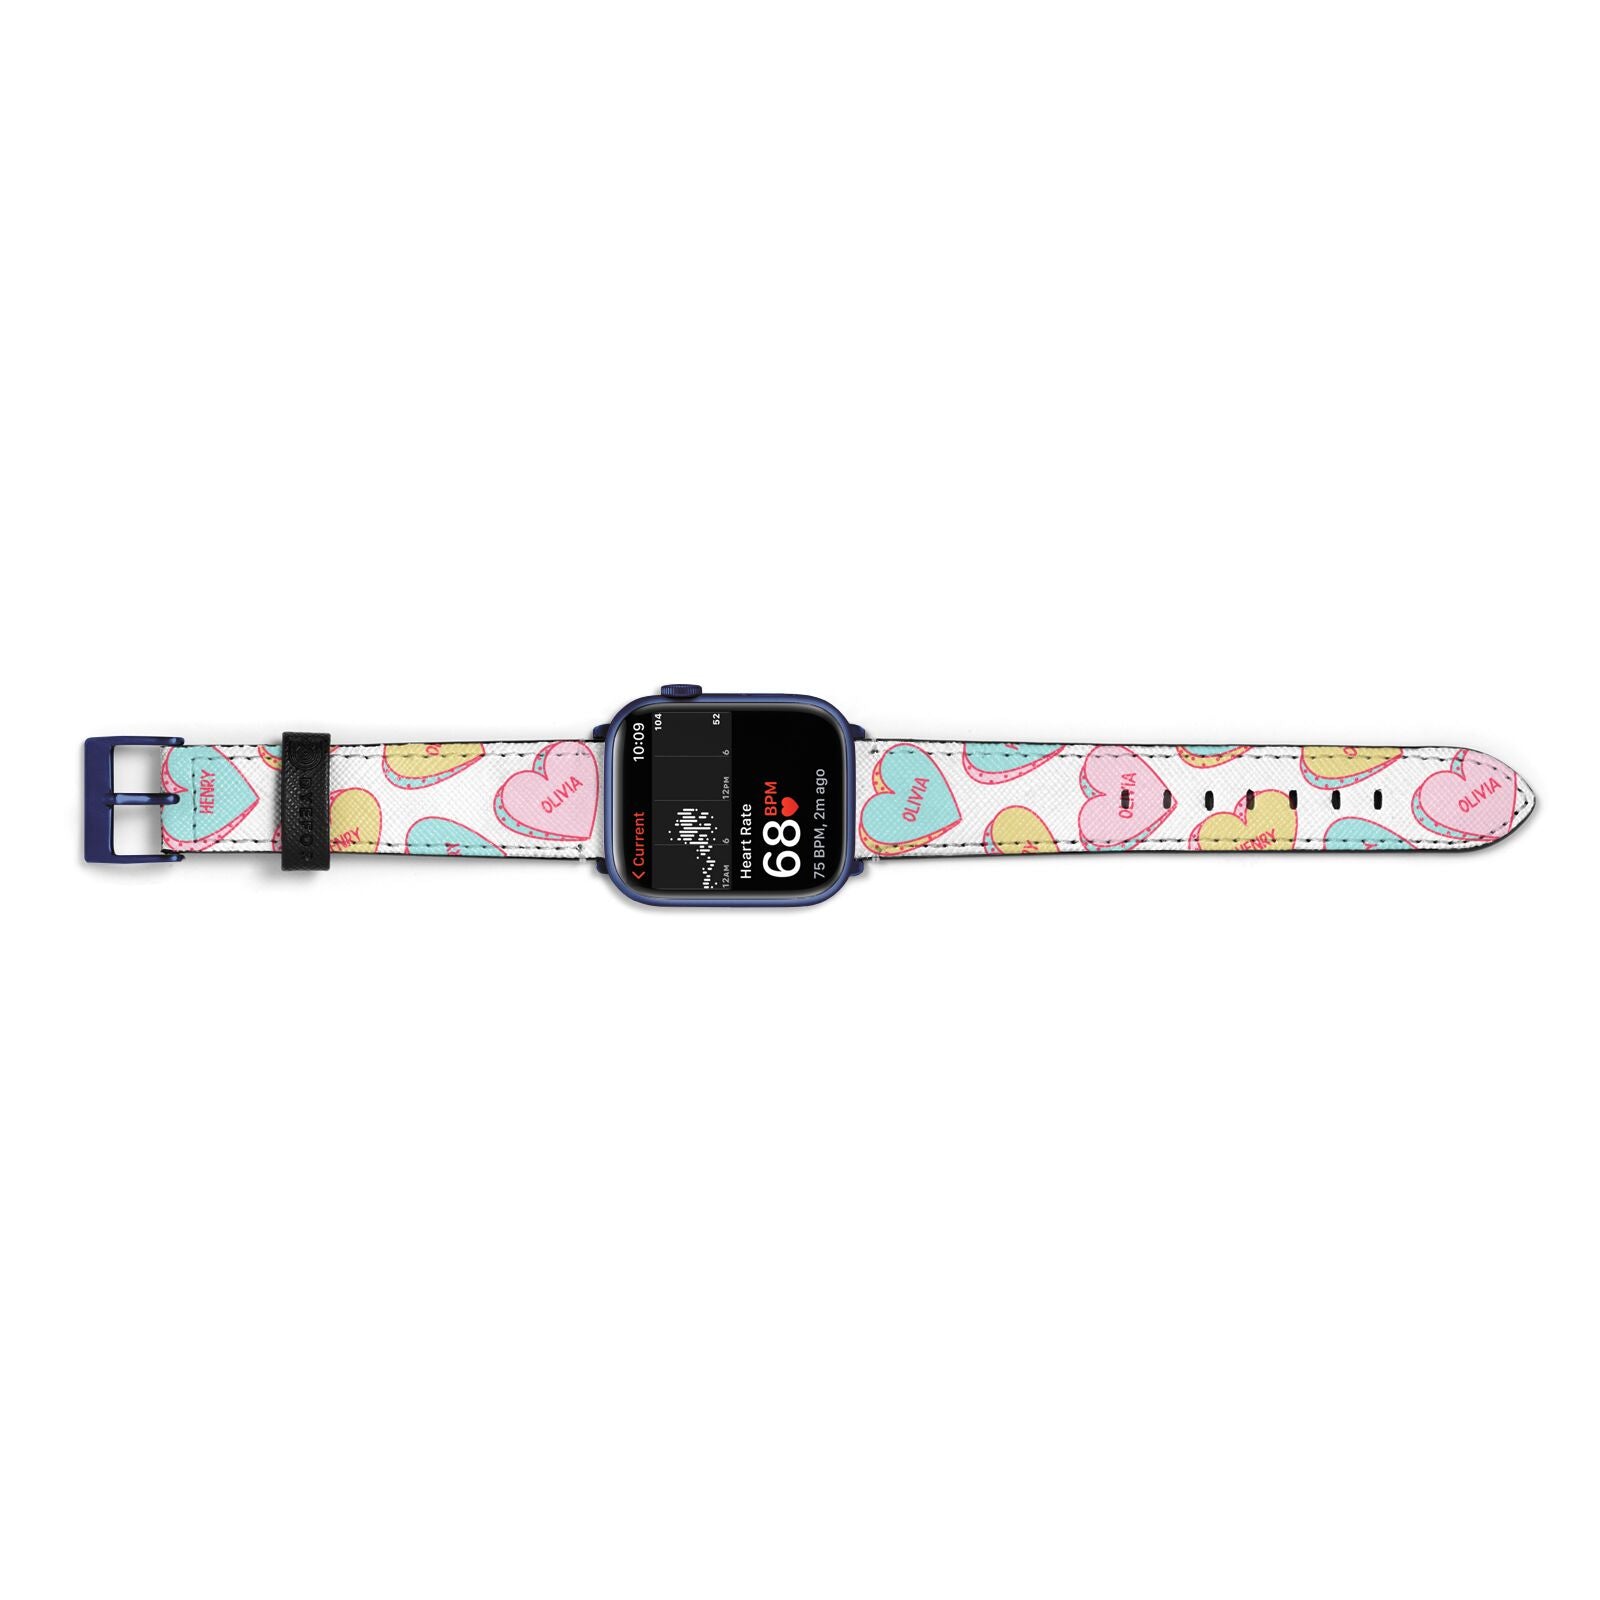 Personalised Heart Sweets Apple Watch Strap Size 38mm Landscape Image Blue Hardware